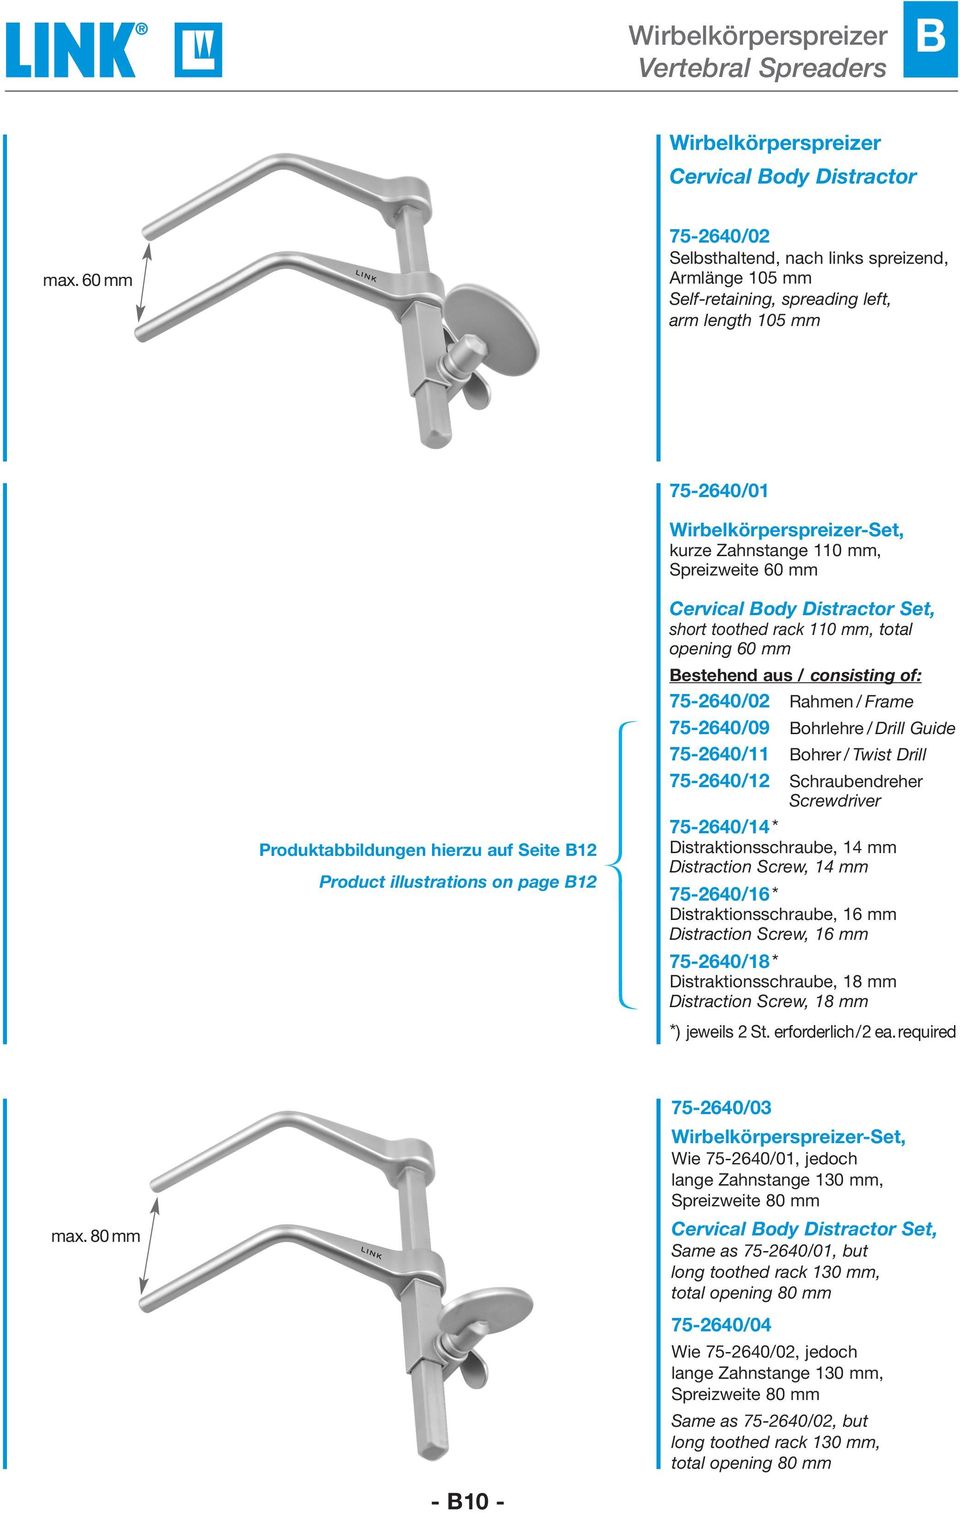 Produktabbildungen hierzu auf Seite 12 Product illustrations on page 12 Cervical ody Distractor Set, short toothed rack 110 mm, total opening 60 mm estehend aus / consisting of: 75-2640/02 Rahmen /